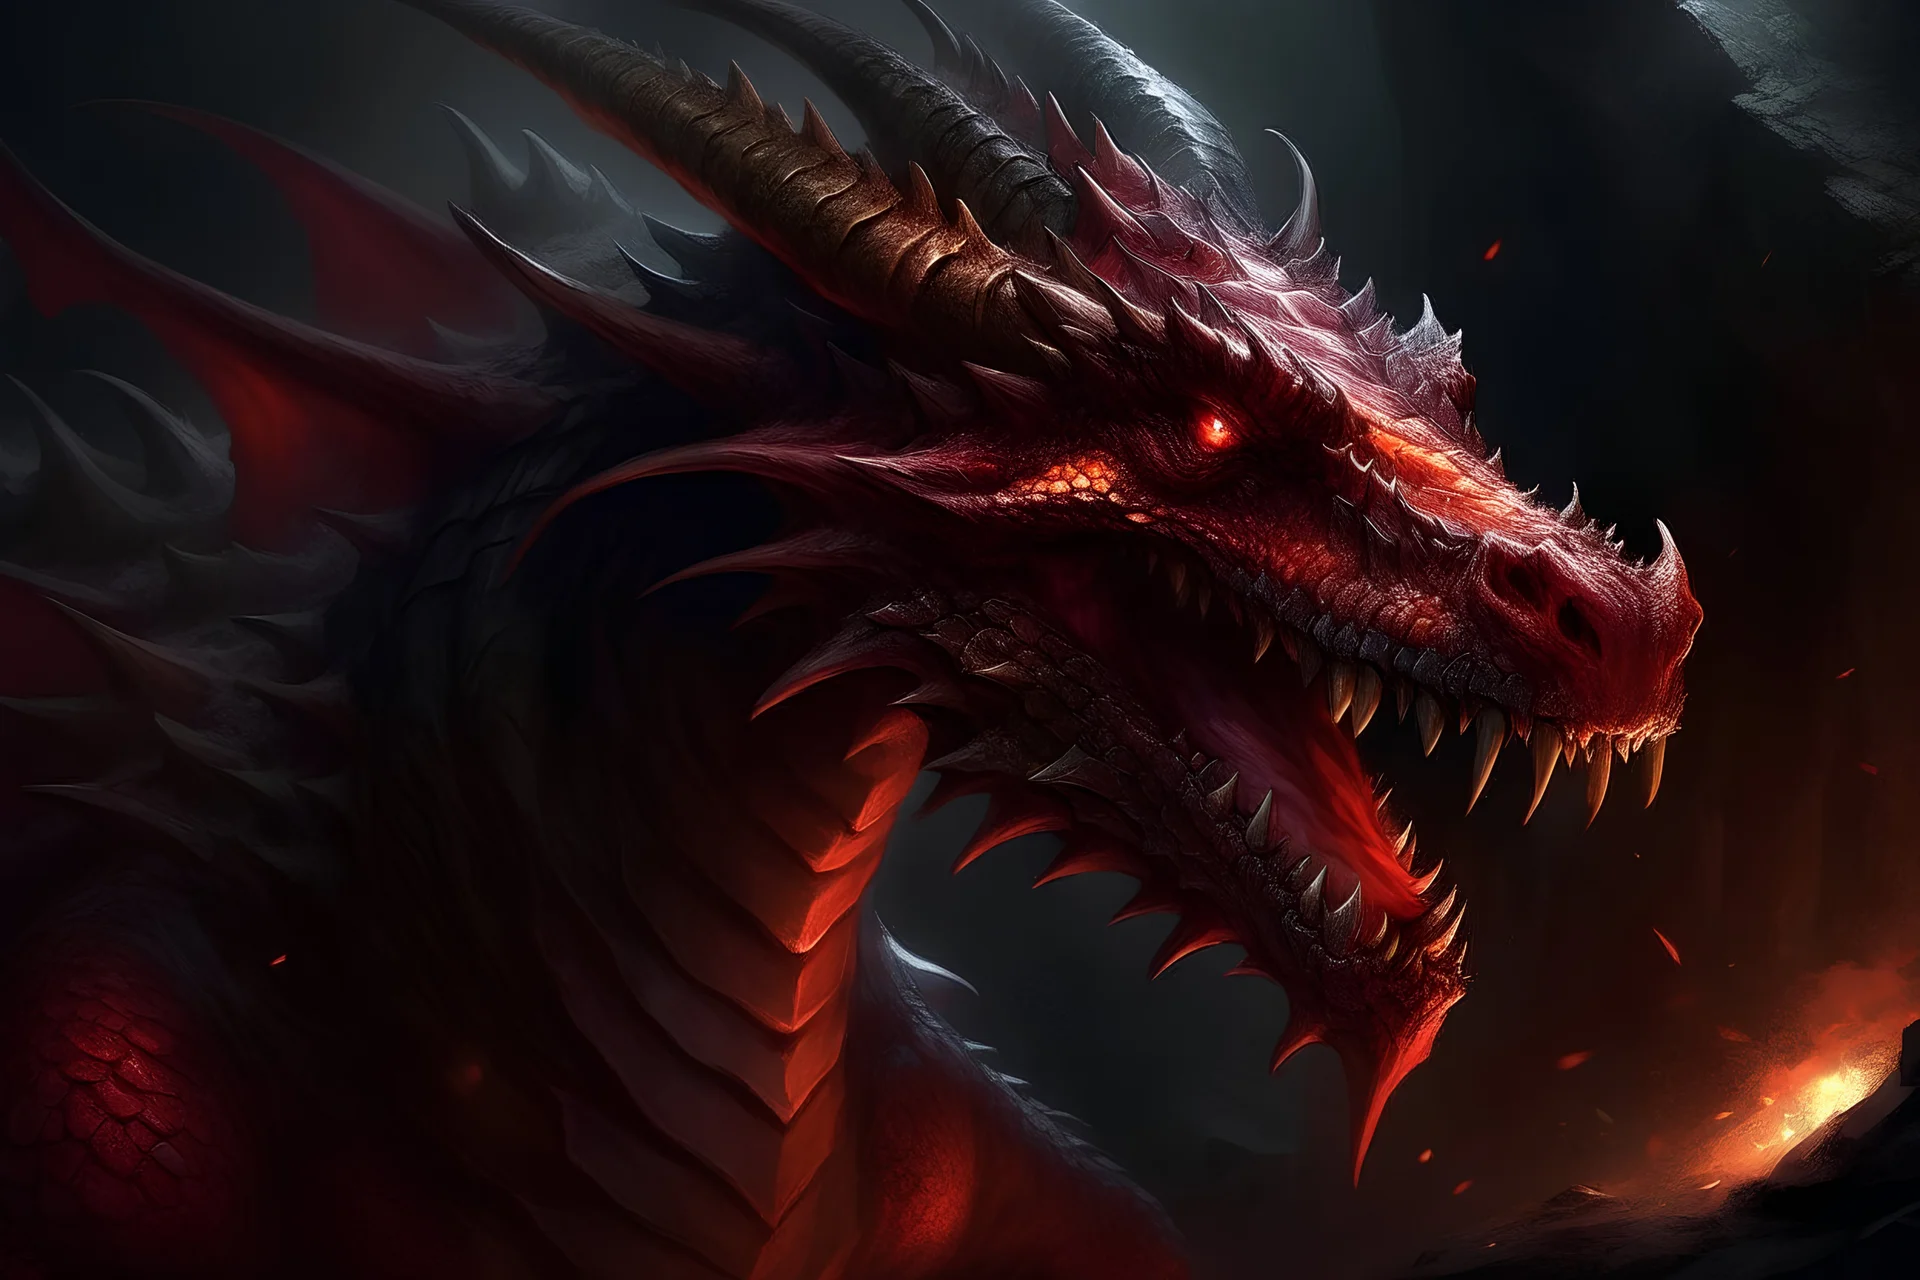 digital paint style, HD, detailed, colourful, medieval, dark Epic fantasy, red dragon, evil